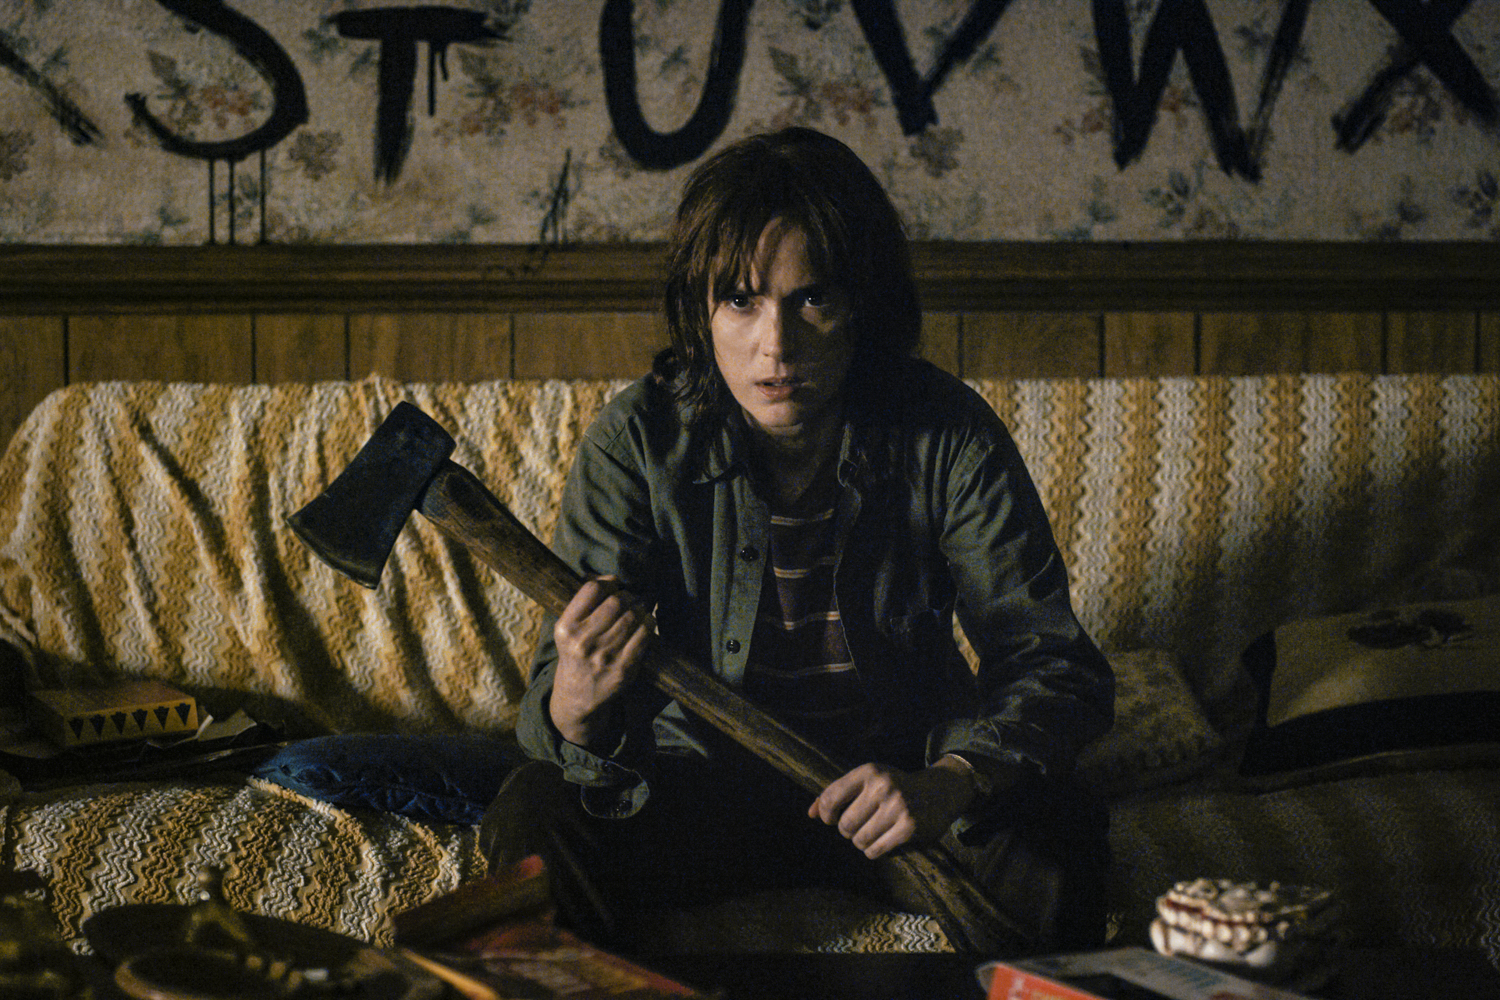 Stranger Things' season five will begin production in January